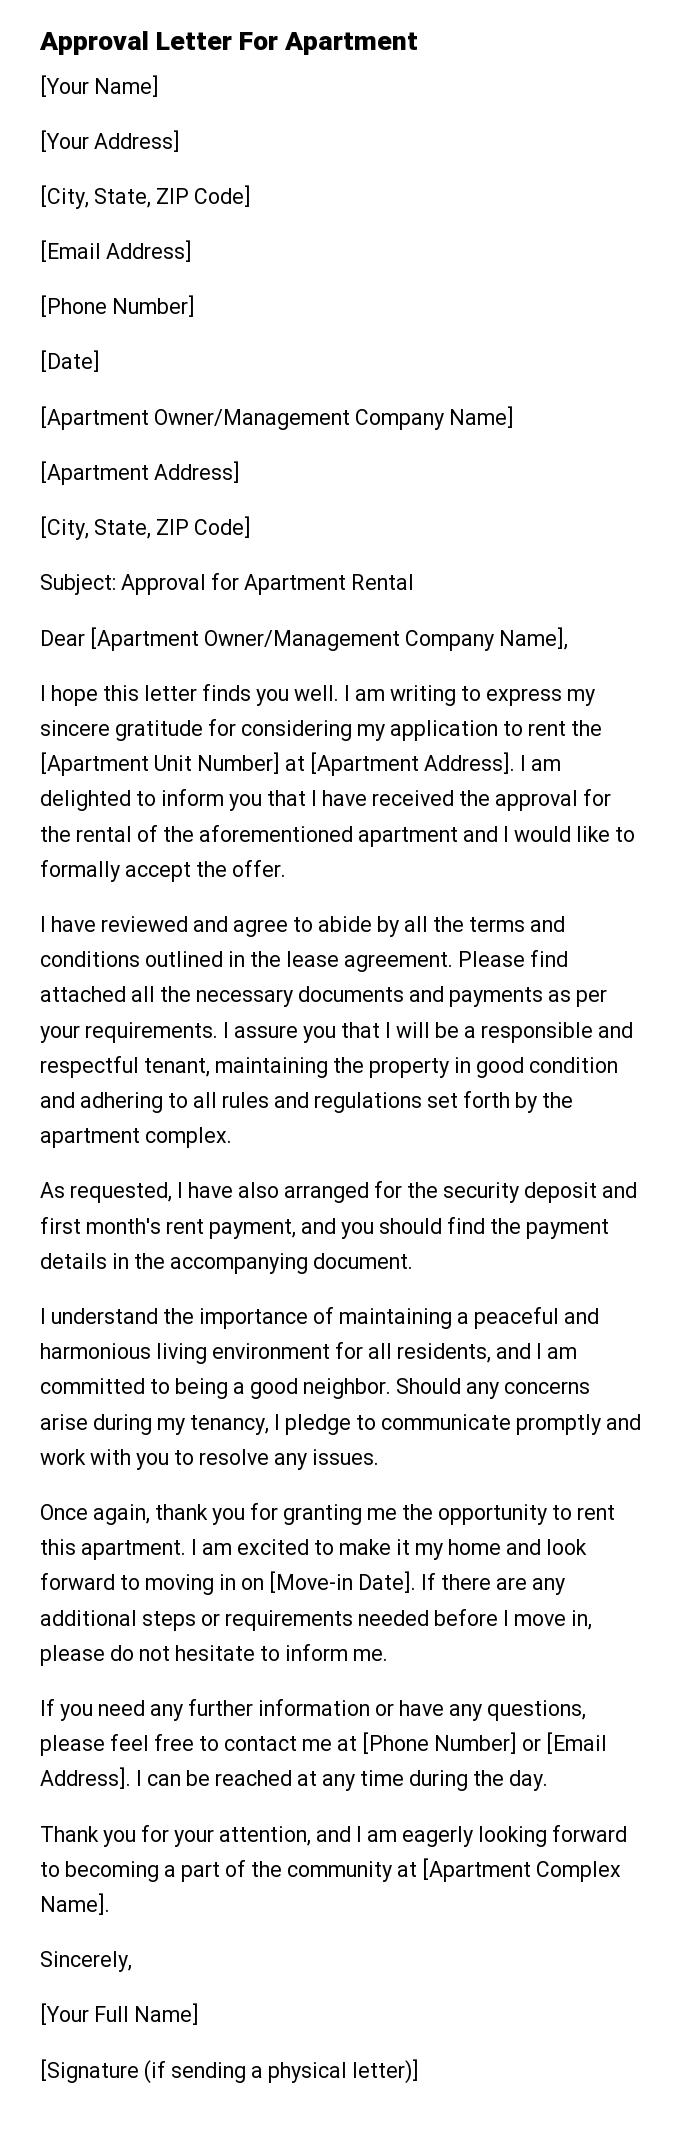 Approval Letter For Apartment